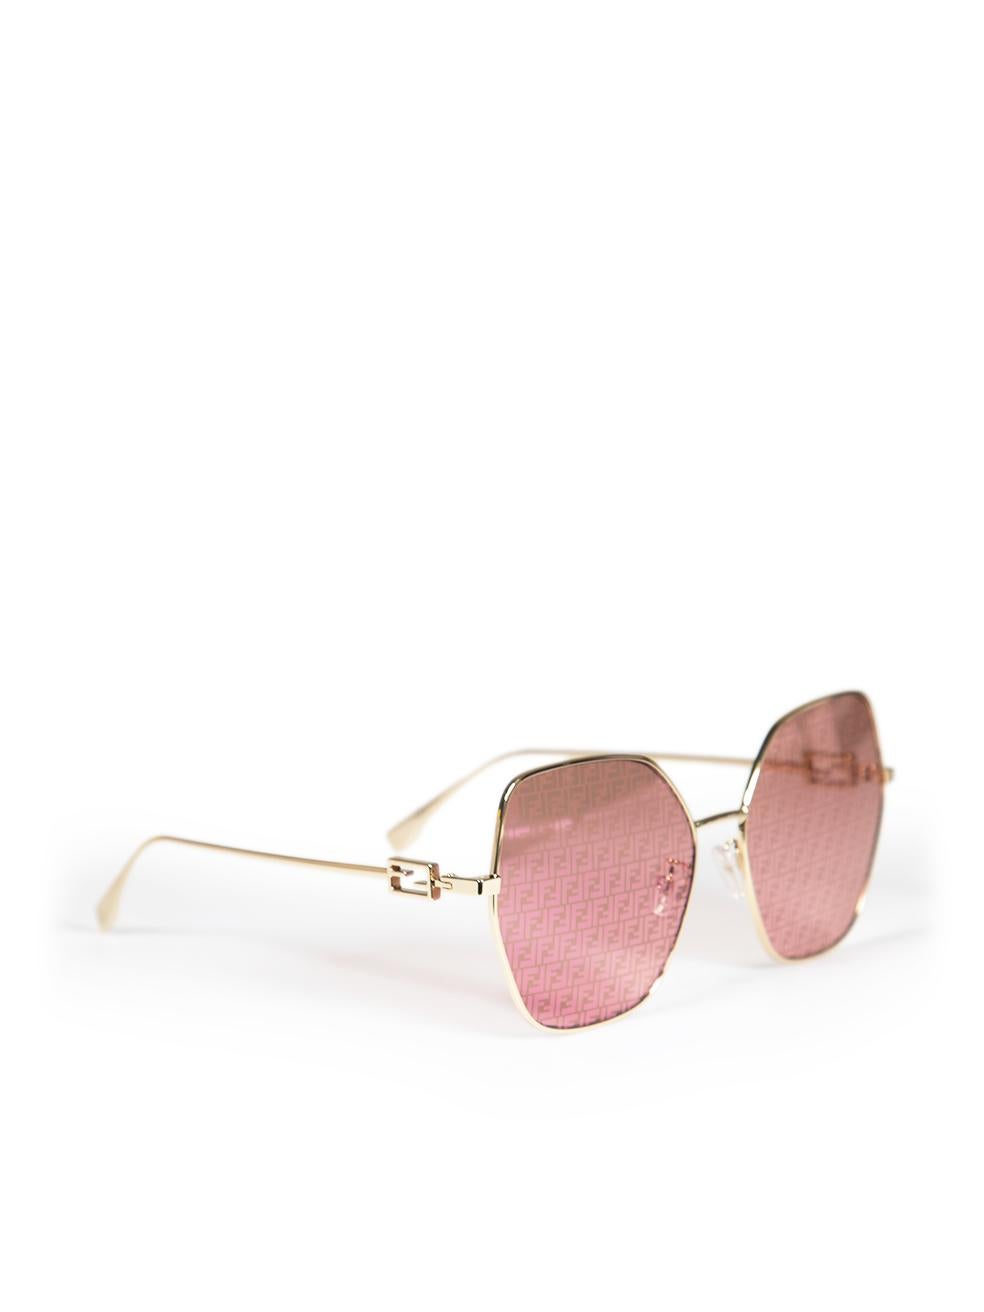 Fendi Dark Pink Logo Butterfly Sunglasses In New Condition For Sale In London, GB